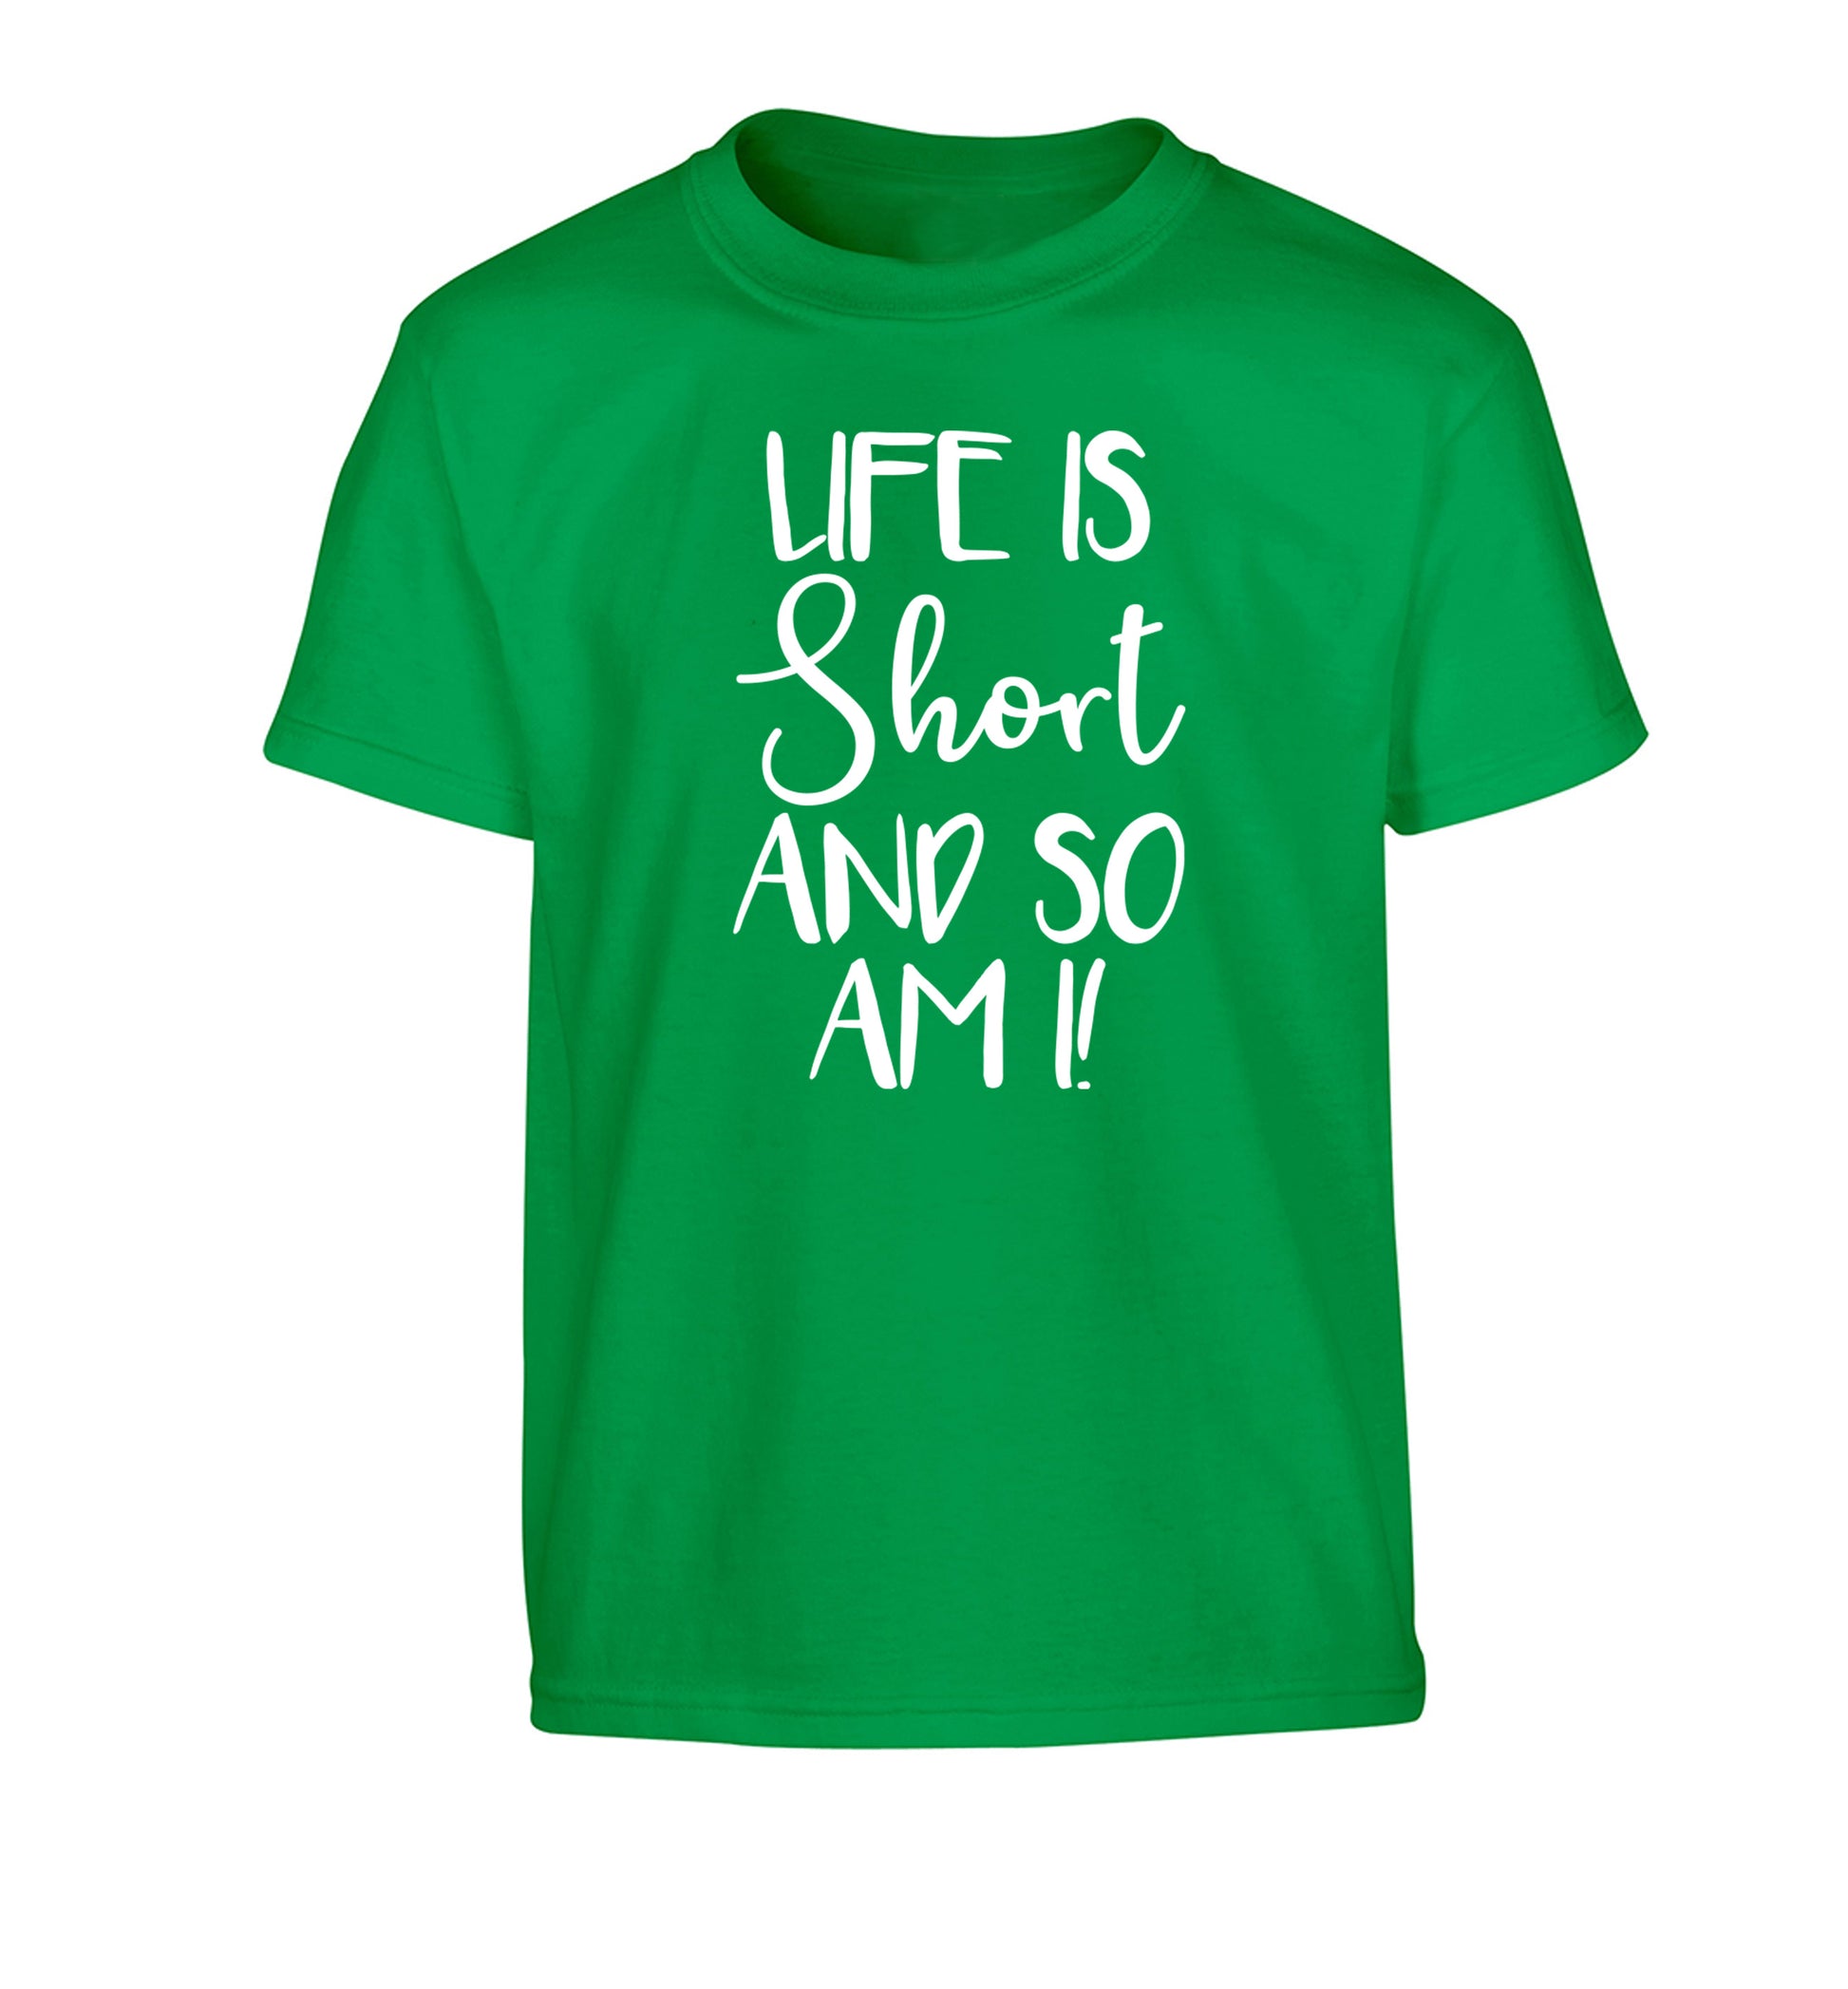 Life is short and so am I! Children's green Tshirt 12-13 Years